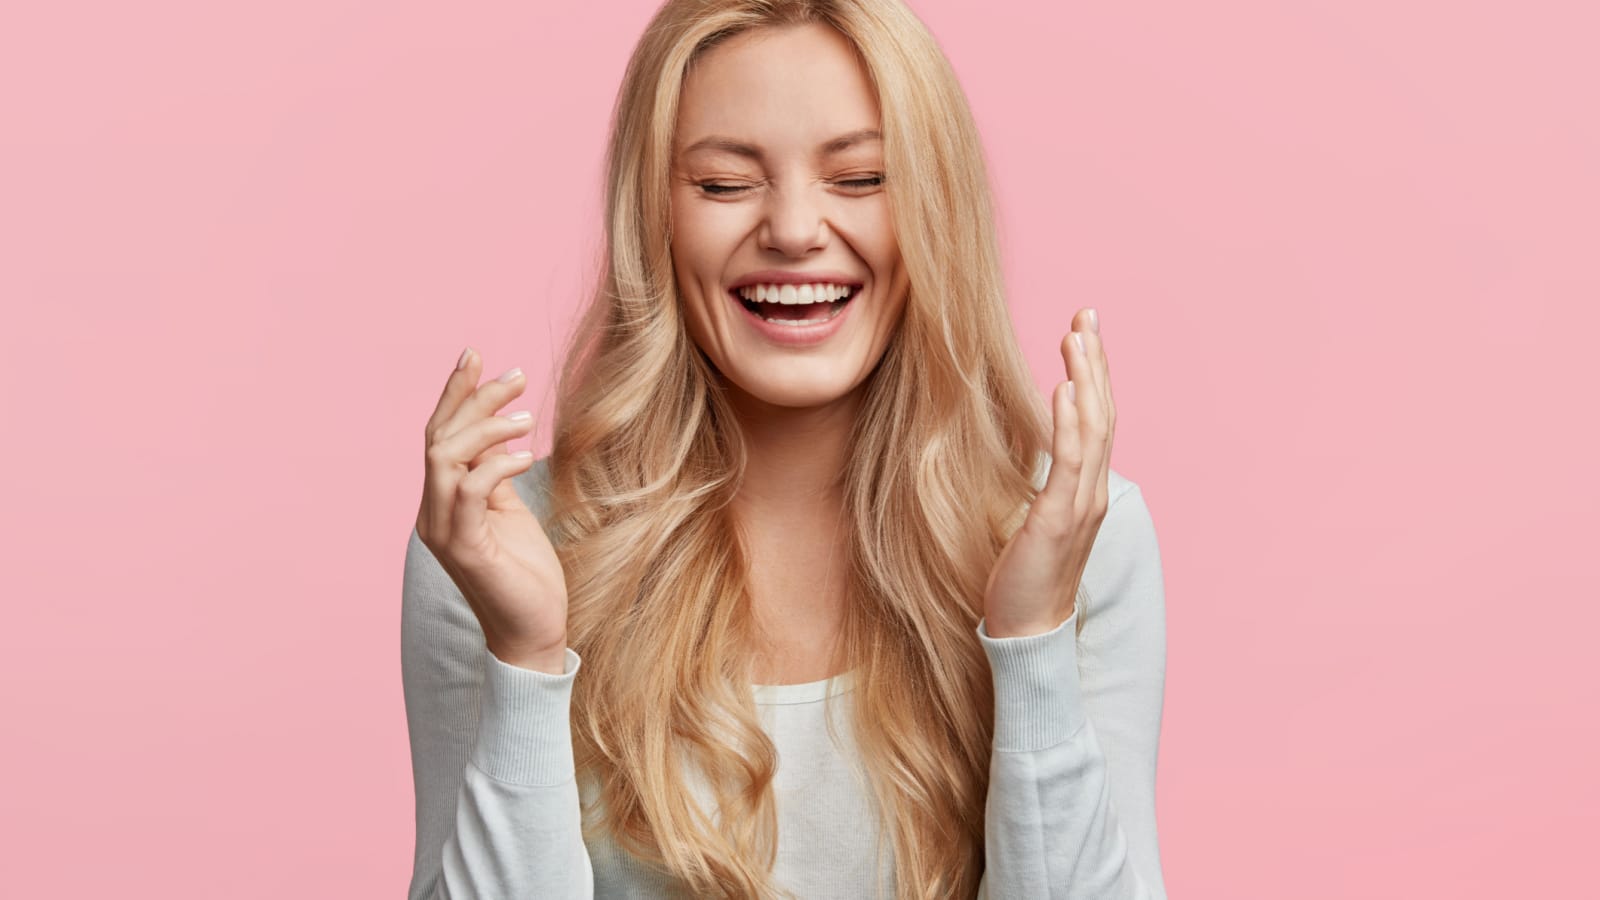 Isolated shot of joyful blonde young cute woman laughs joyfully as hears funny anecdote from friend, has long light hair, poses against pink studio wall. Happiness and positive emotions concept